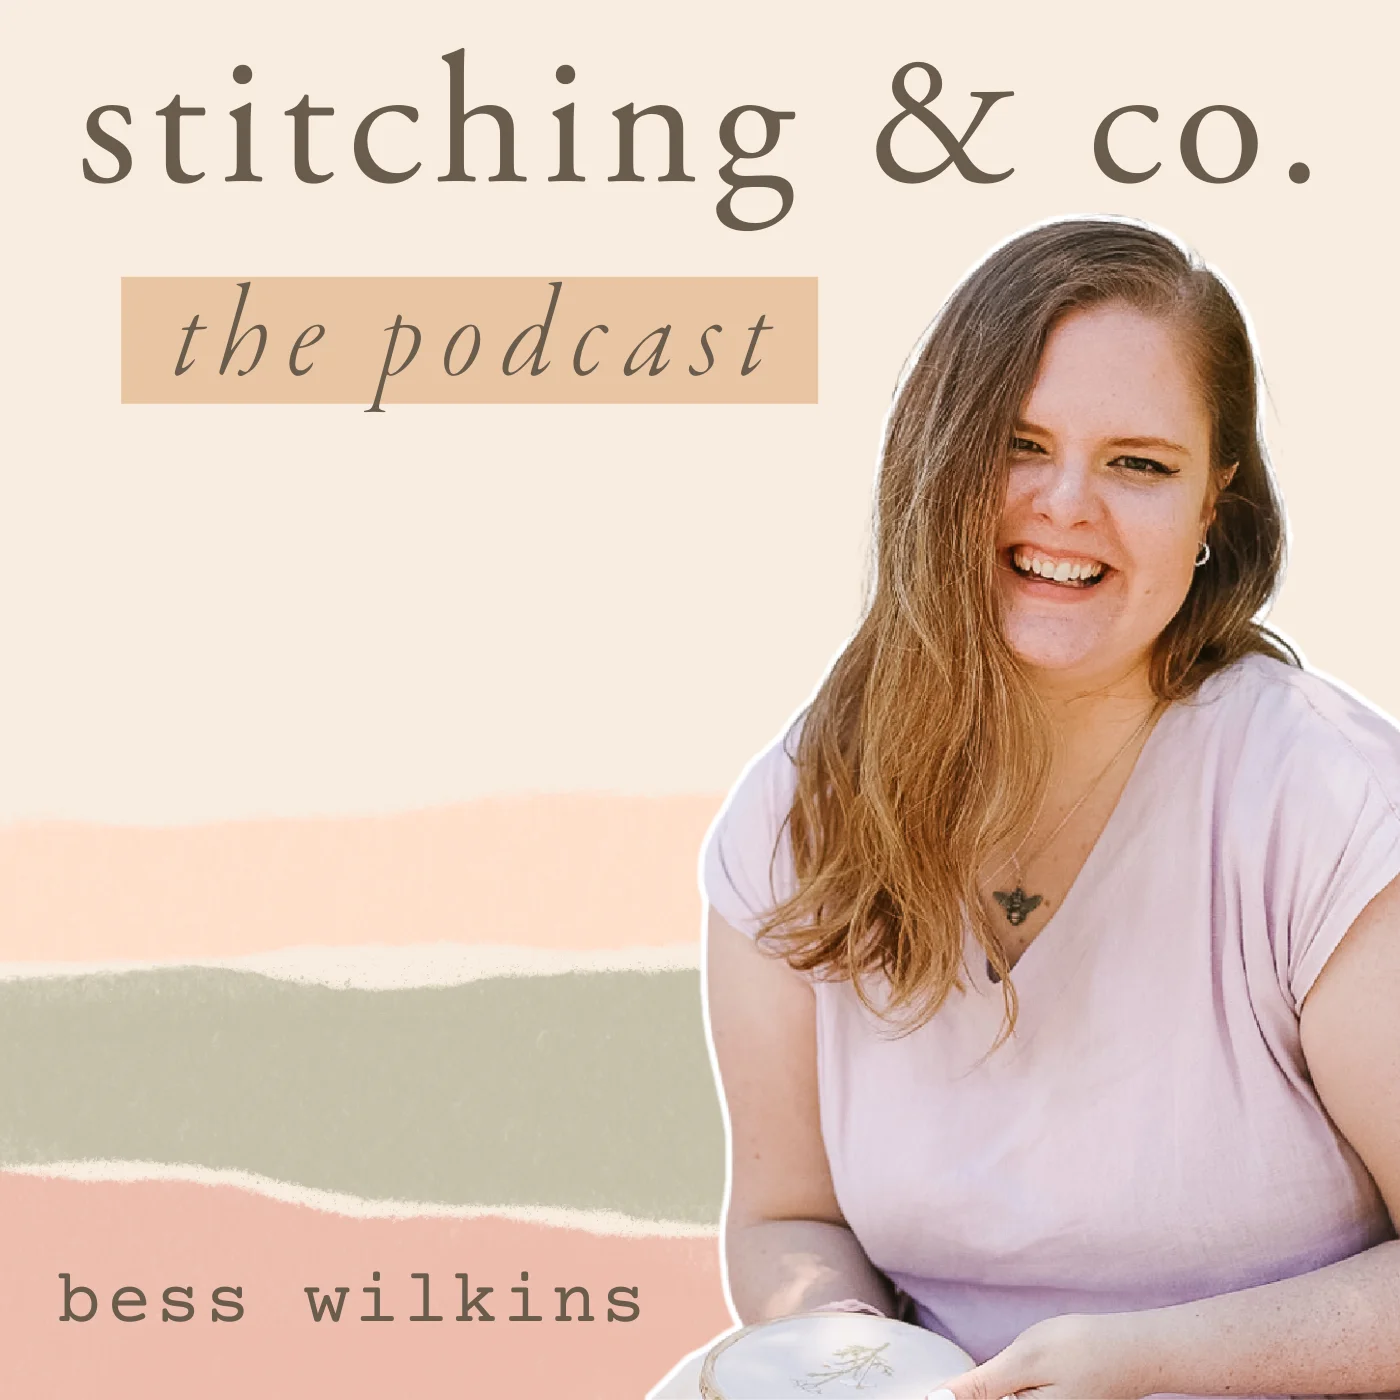 The Stitching & Co. Podcast